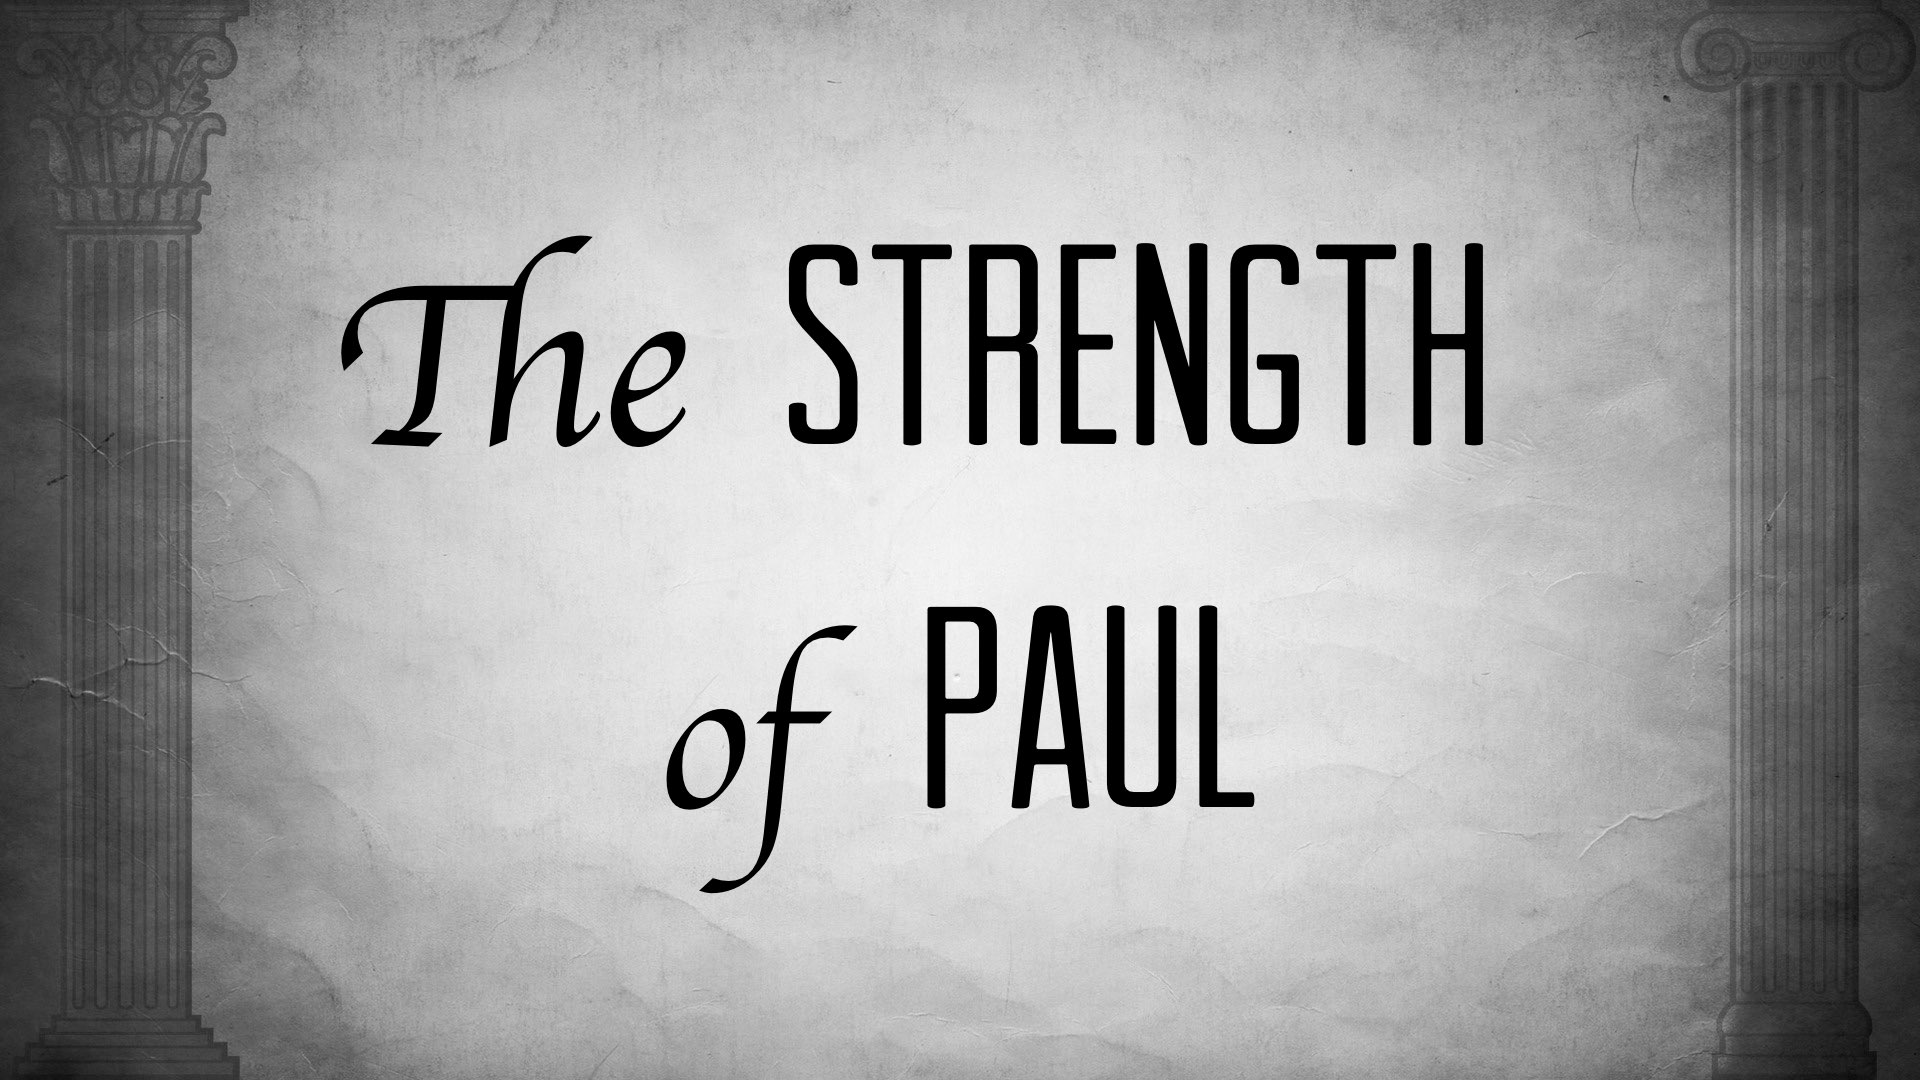 The Strength of Paul